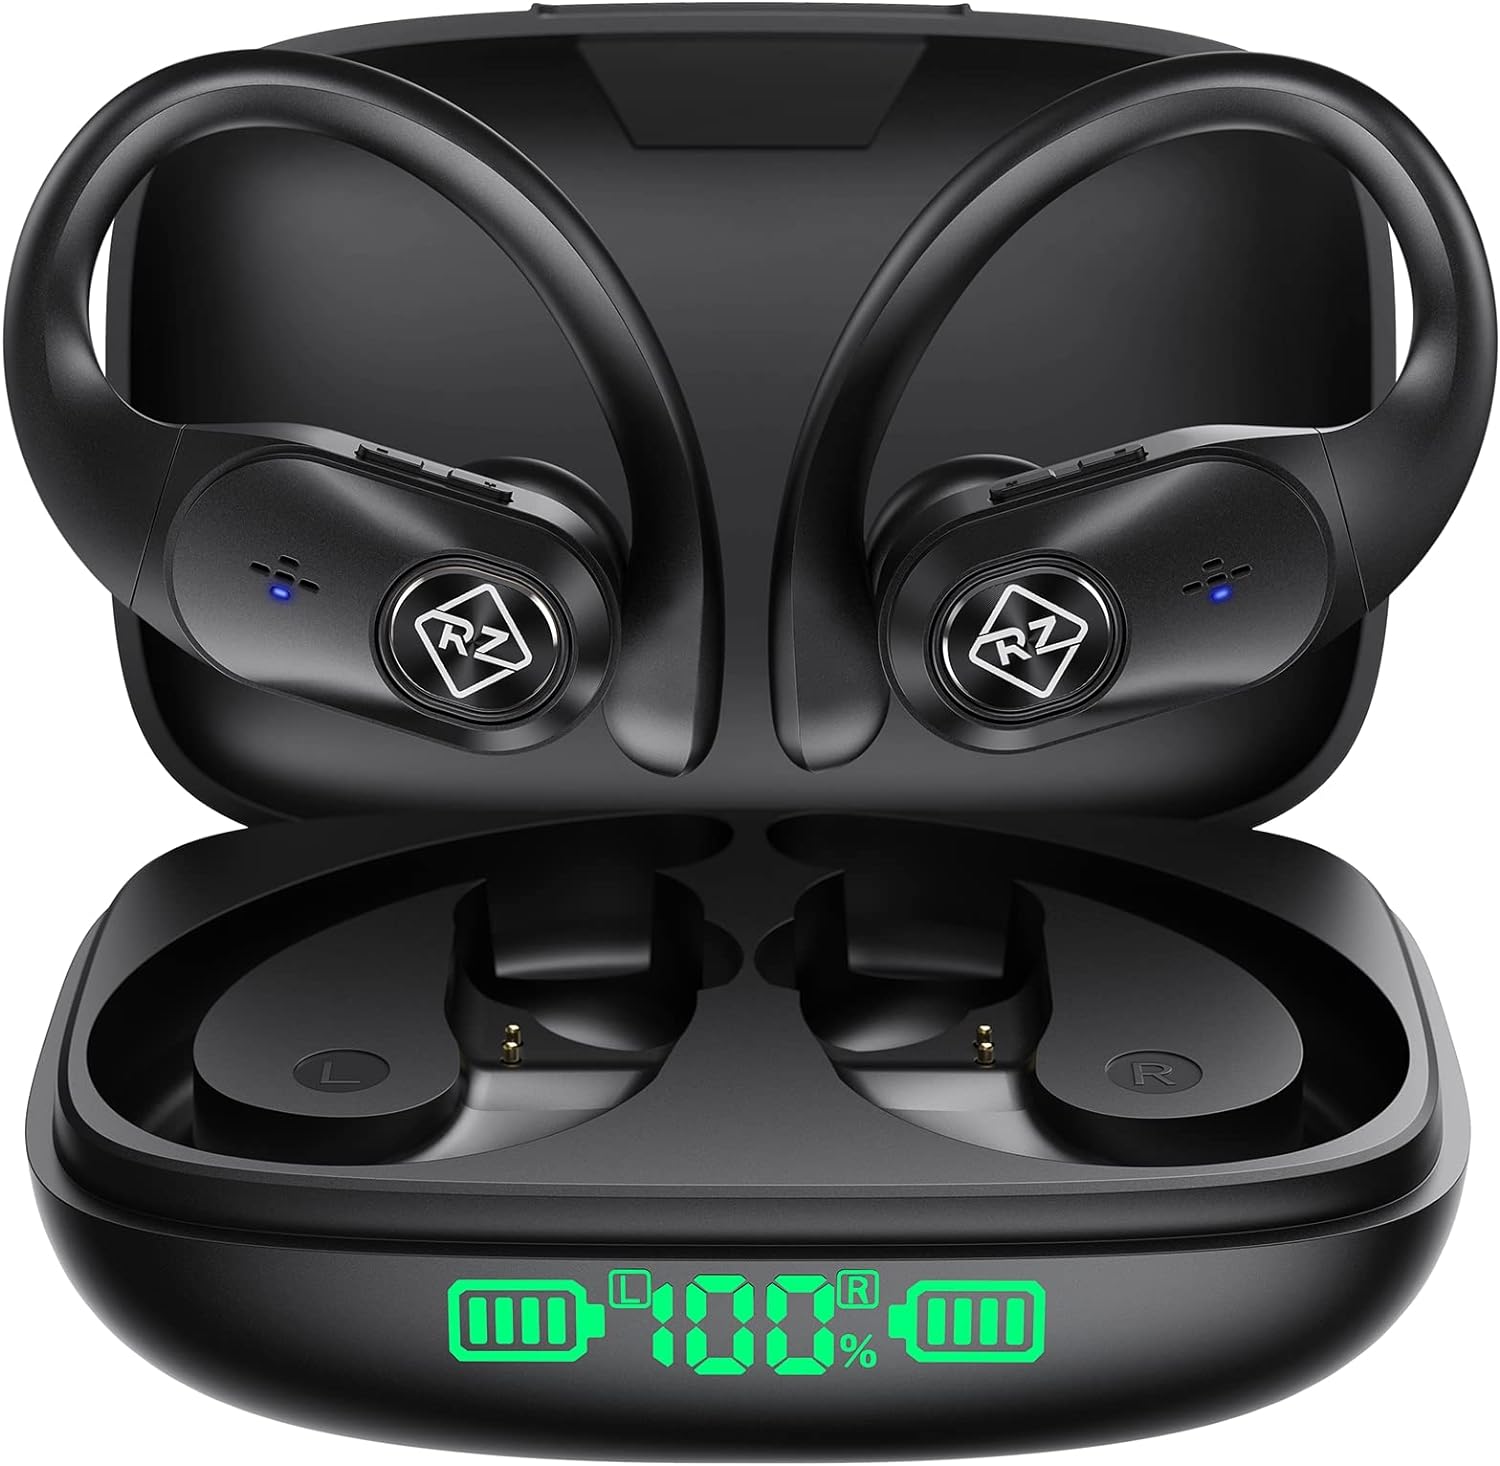 Waterproof Wireless Earbuds with Mic and LED Display